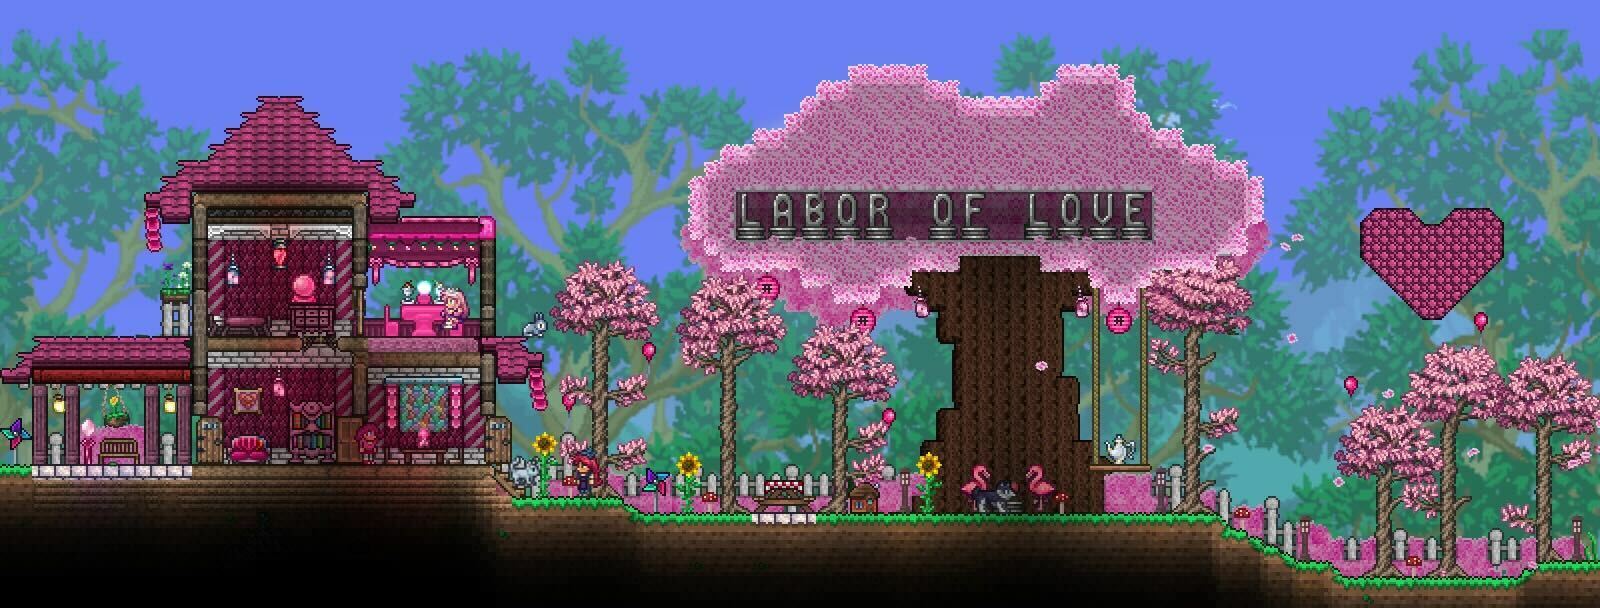 Ten years after release, Terraria gets Steam Workshop support